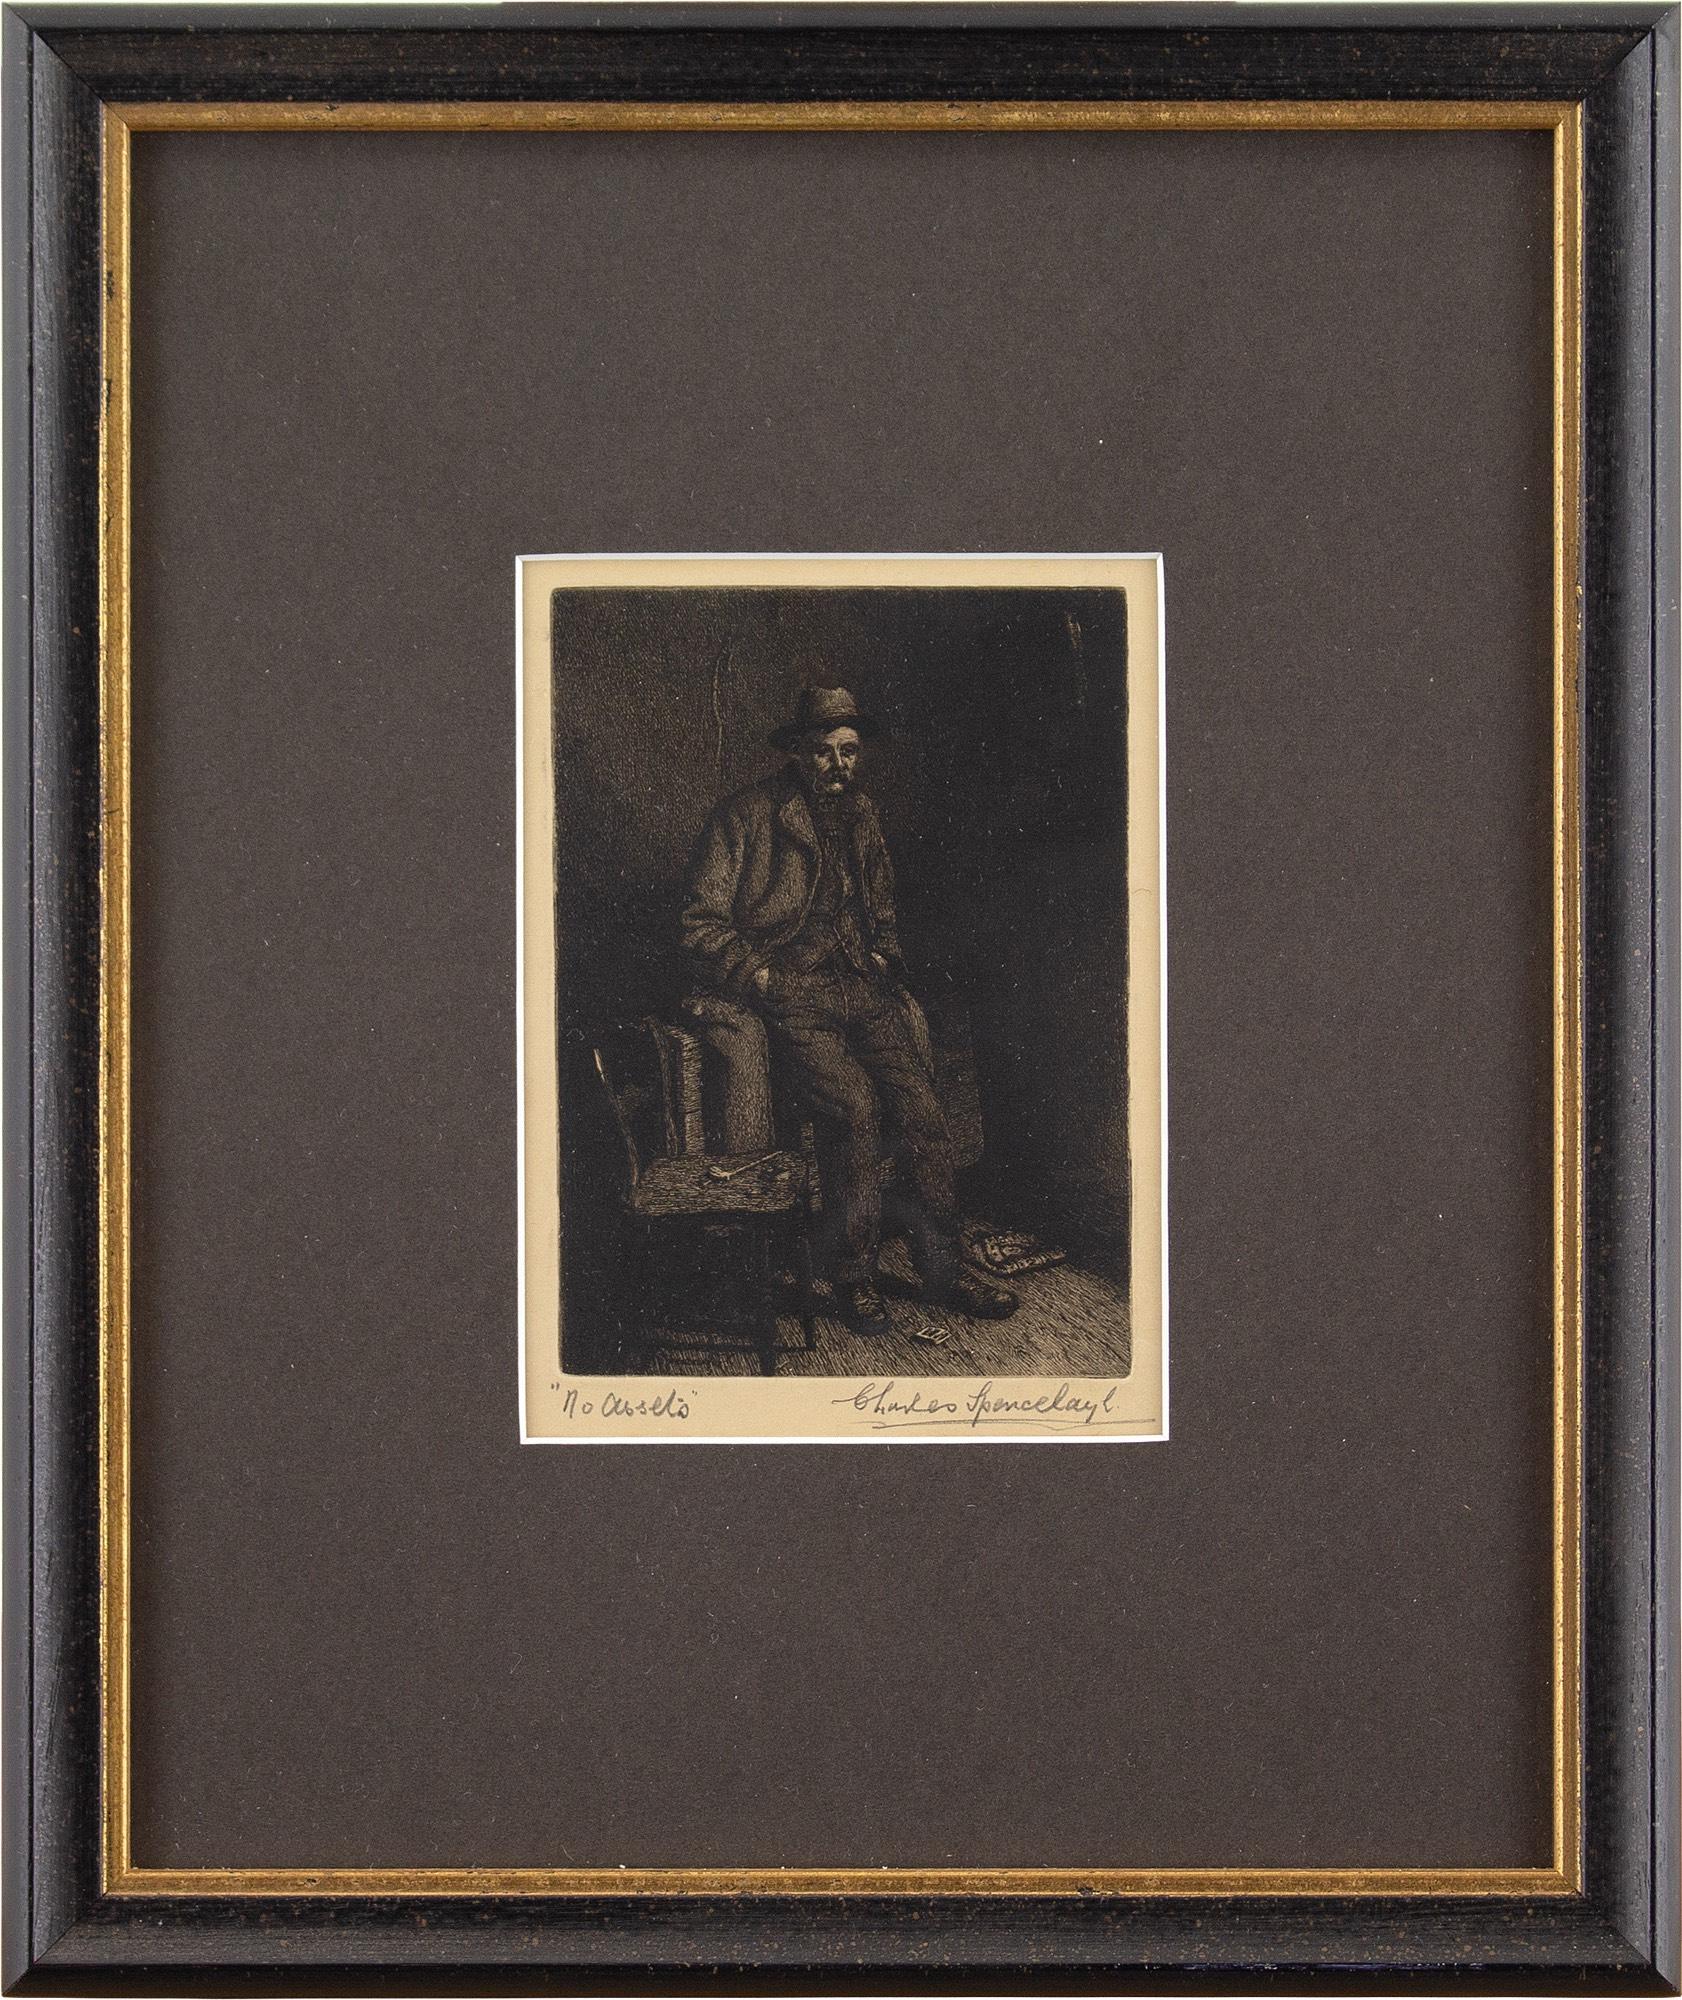 This early 20th-century etching by British artist Charles Spencelayh depicts a man stripped of all wealth. He stands in a sparse room with hands in pockets, lacking even the basic necessities of tobacco and matches. A chair is partly dismantled,